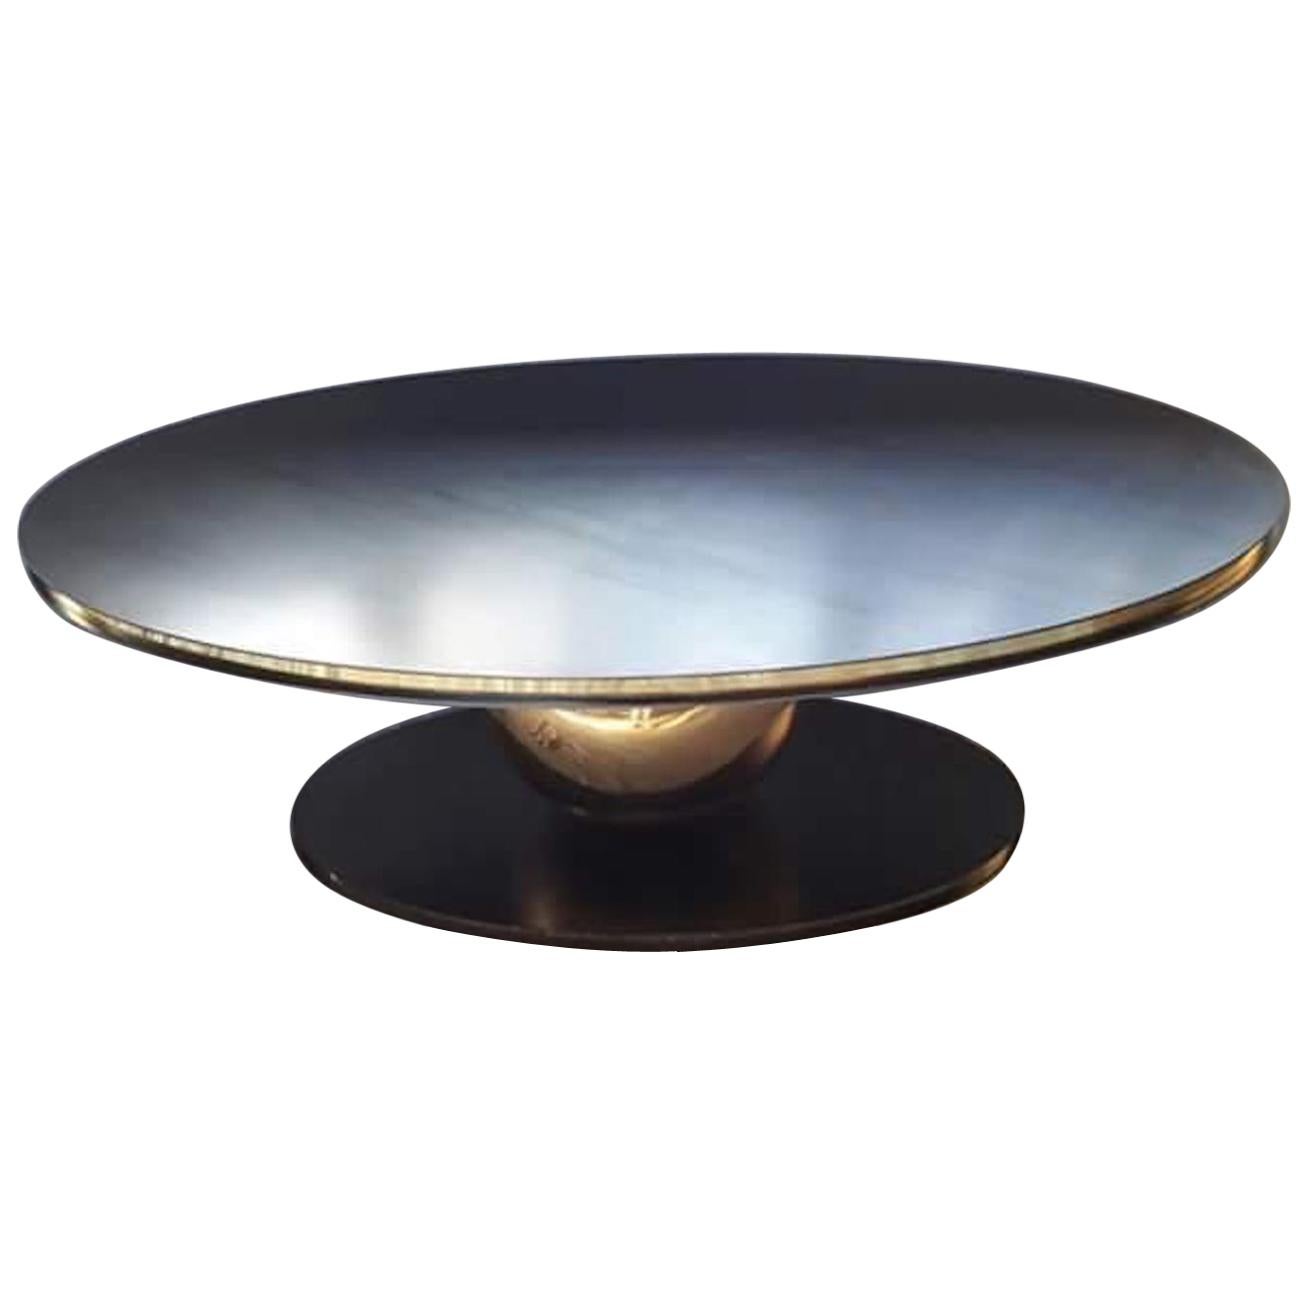 Contemporary Italian Iron and Brass Coffee Table or Center Table